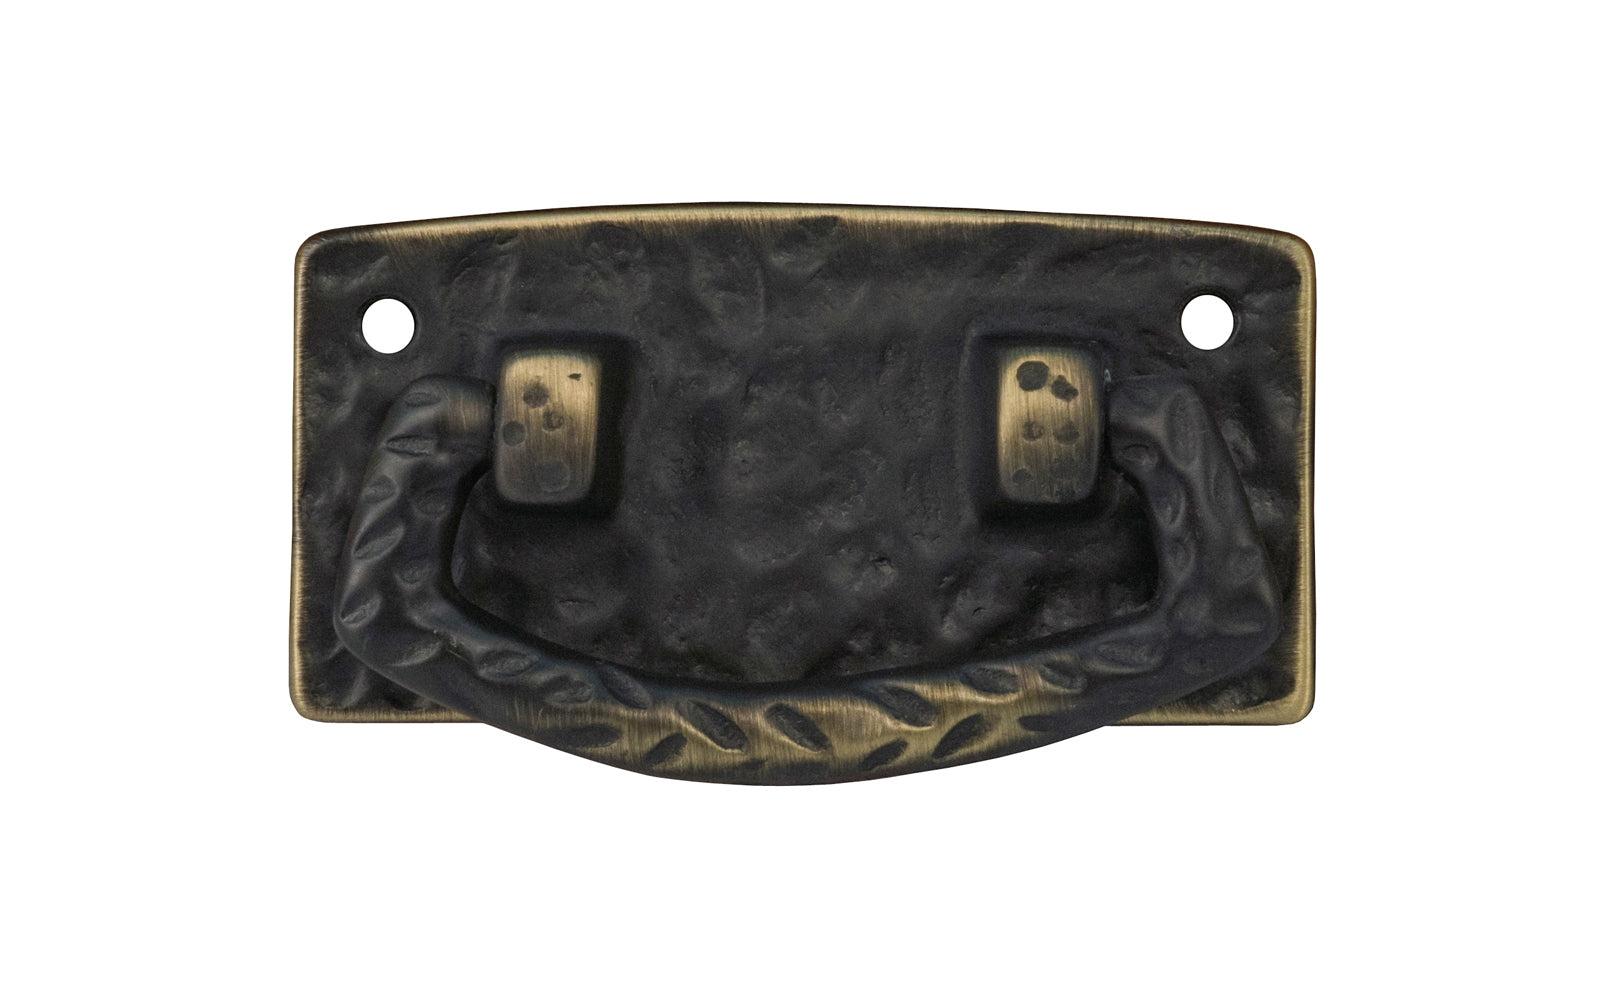 Vintage-style Hardware · Solid Brass Hammered Drop Pull. The pull plate has a hammered surface that gives a rustic & stylish look. Designed in the Mission or Arts & Crafts style, Gustav Stickley style hardware. Antique brass finish trim.